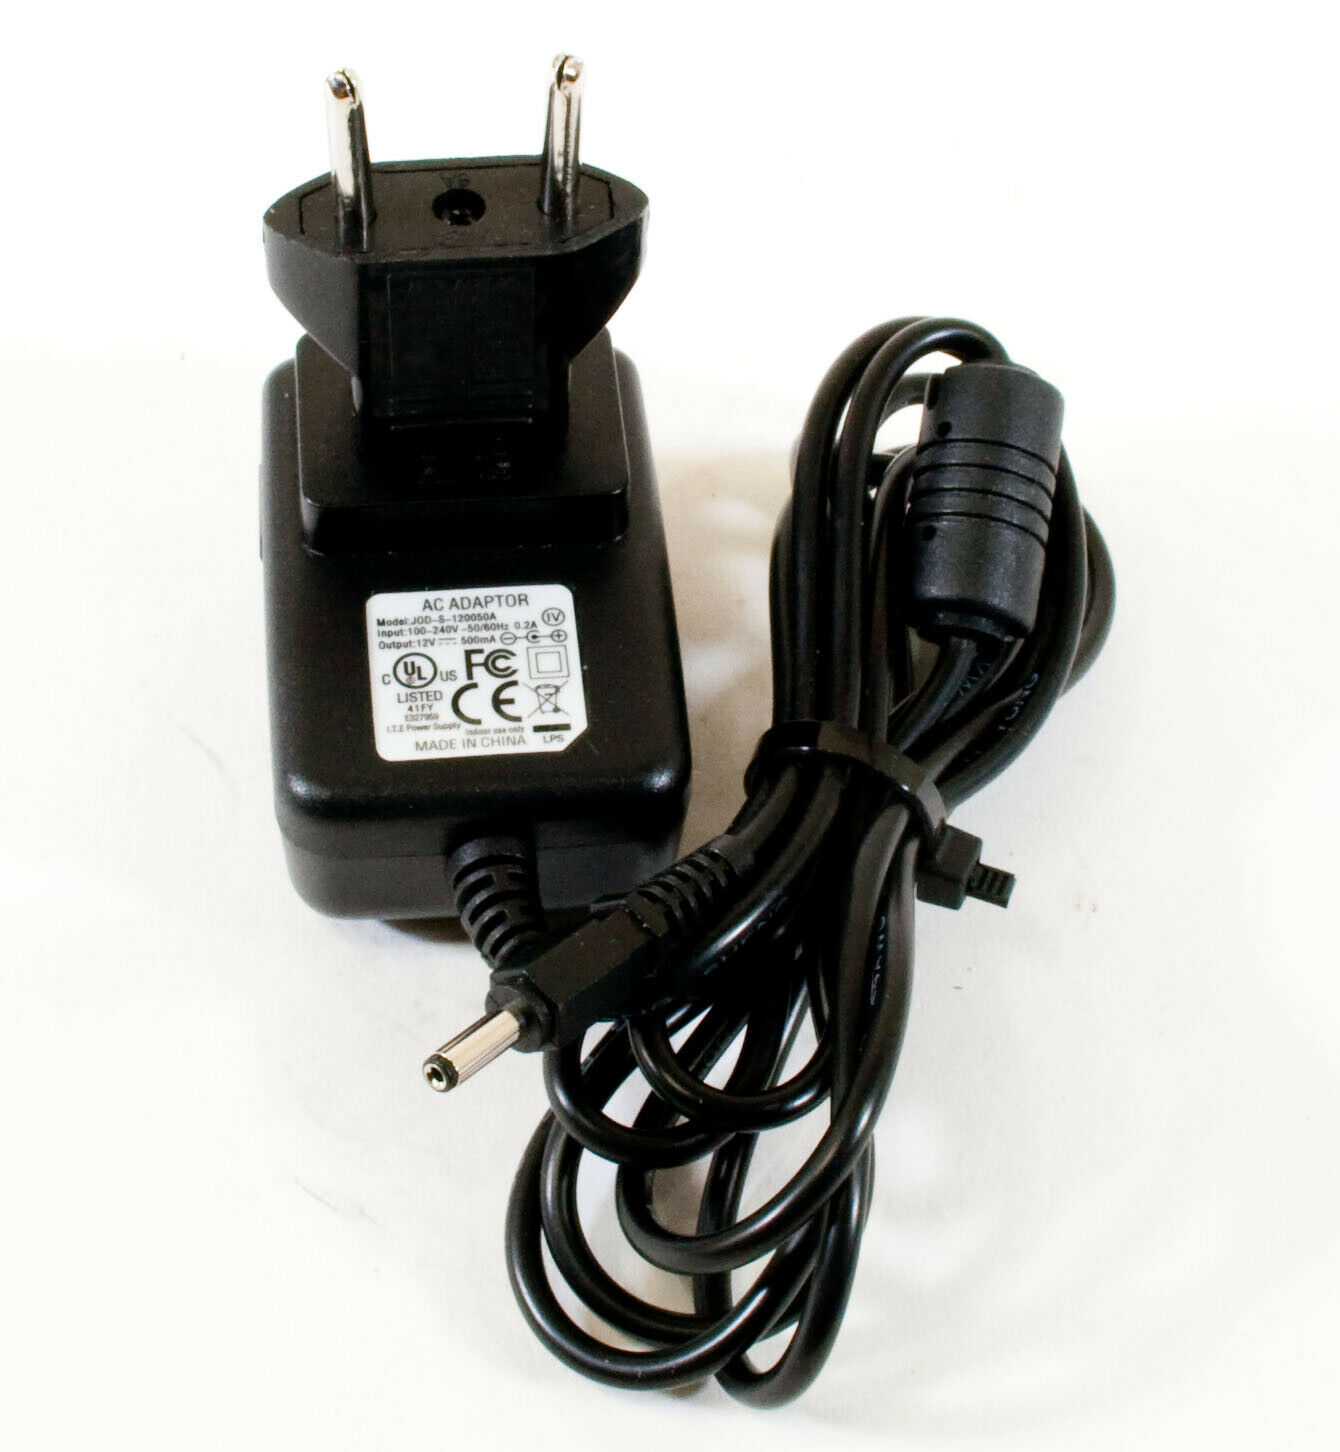 JOD-S-120050A AC Adapter 12V 500mA Original I.T.E. Power Supply Output Current: 500 mA Type: Power Adapter MPN: JOD-S - Click Image to Close